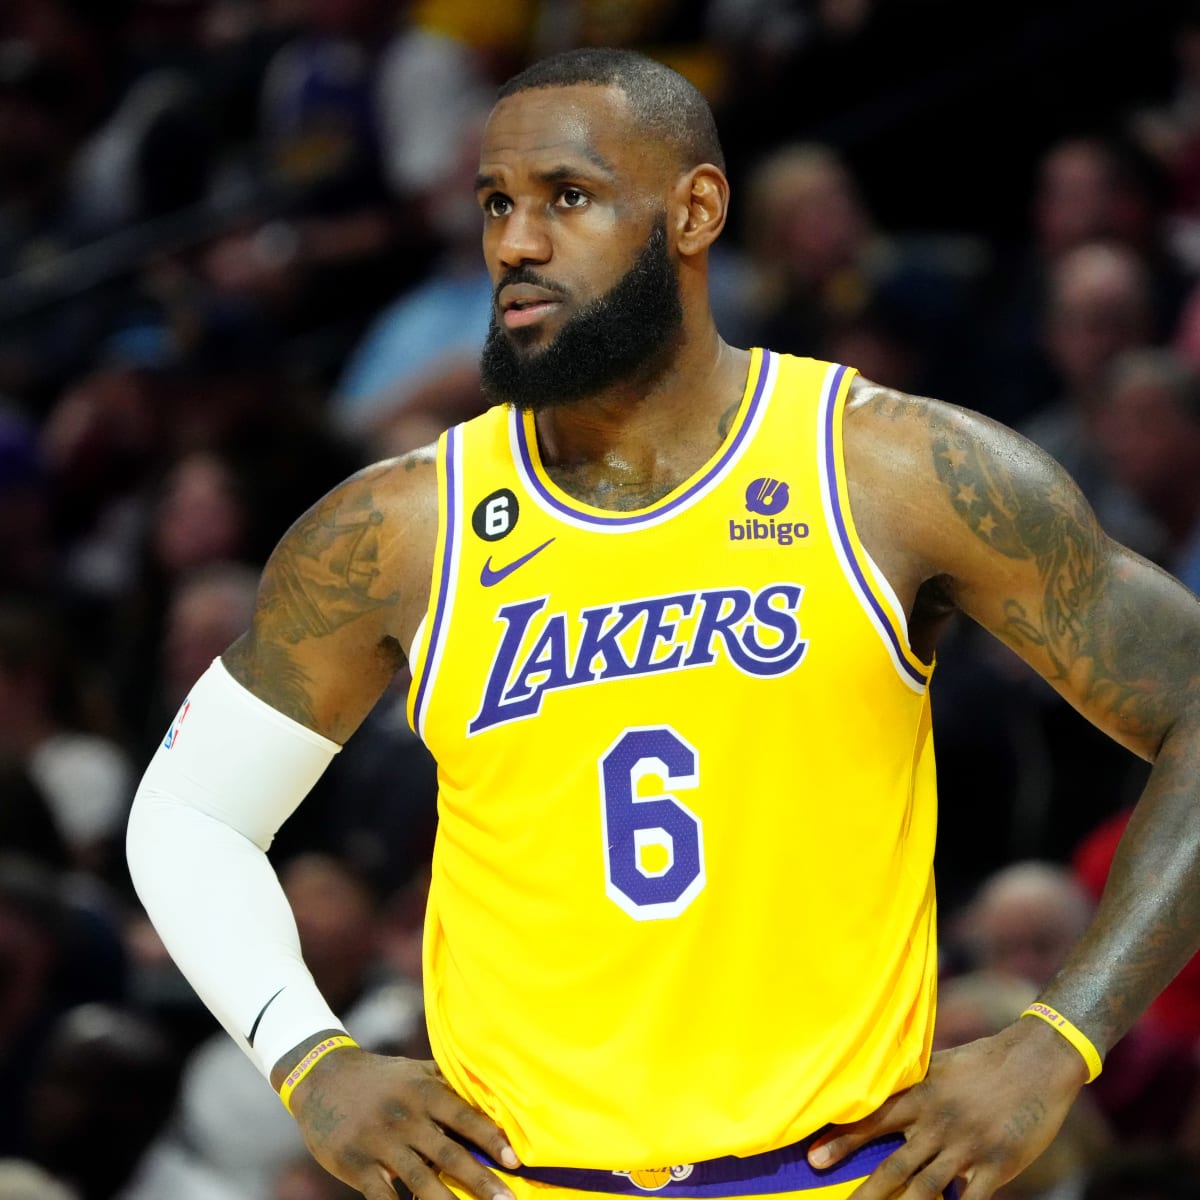 Lakers' LeBron James changes jersey number back to No. 6 - The Athletic